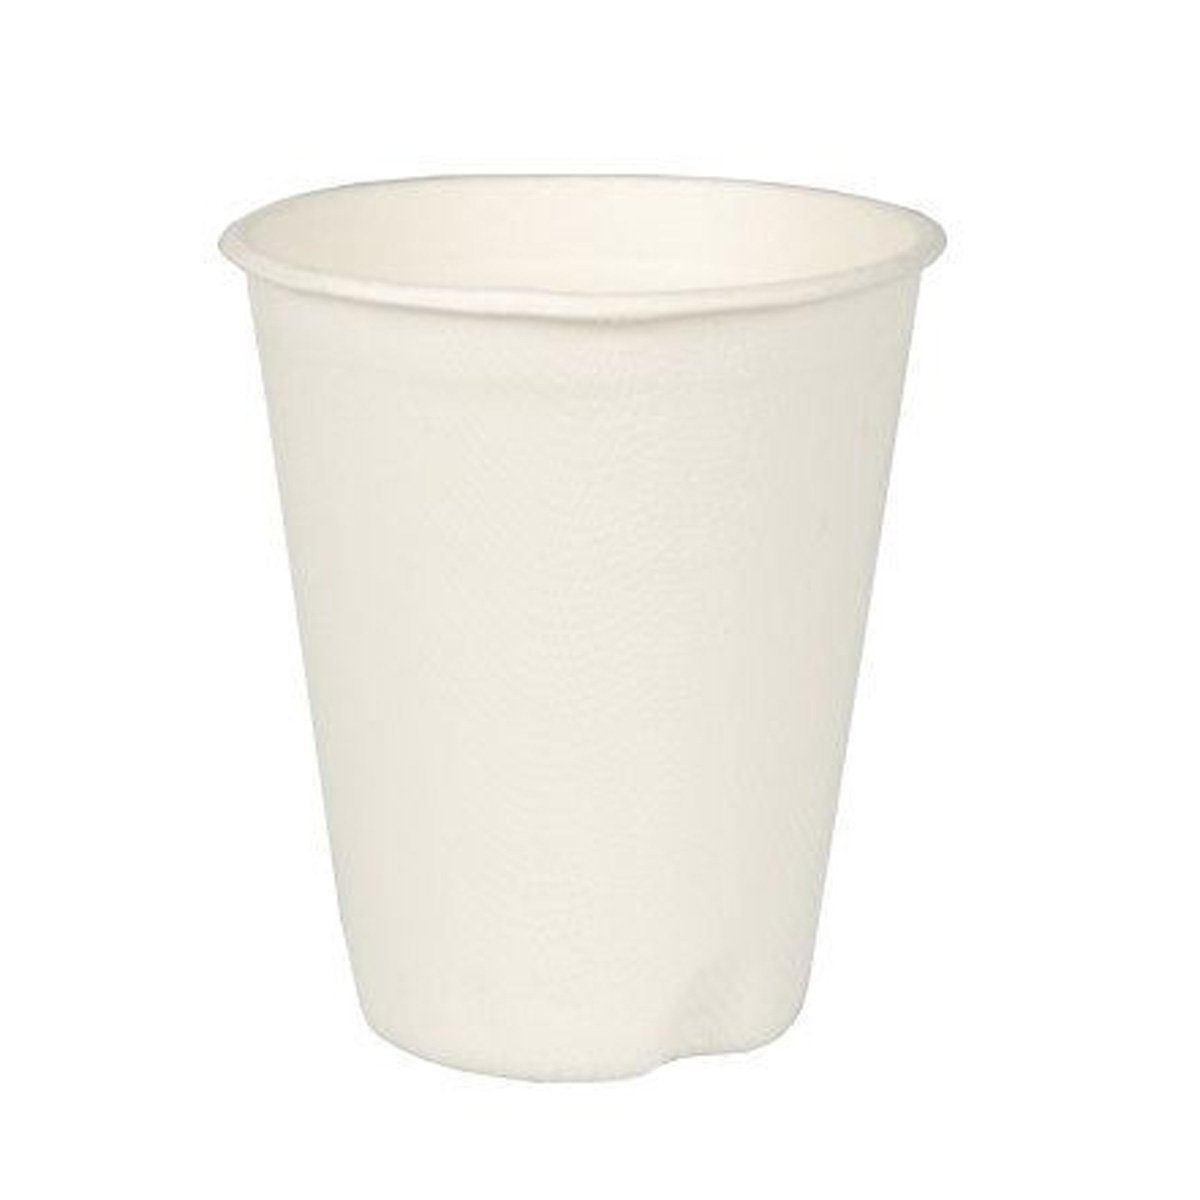 Holz PAPSTAR Coffee-to-go-Becher,